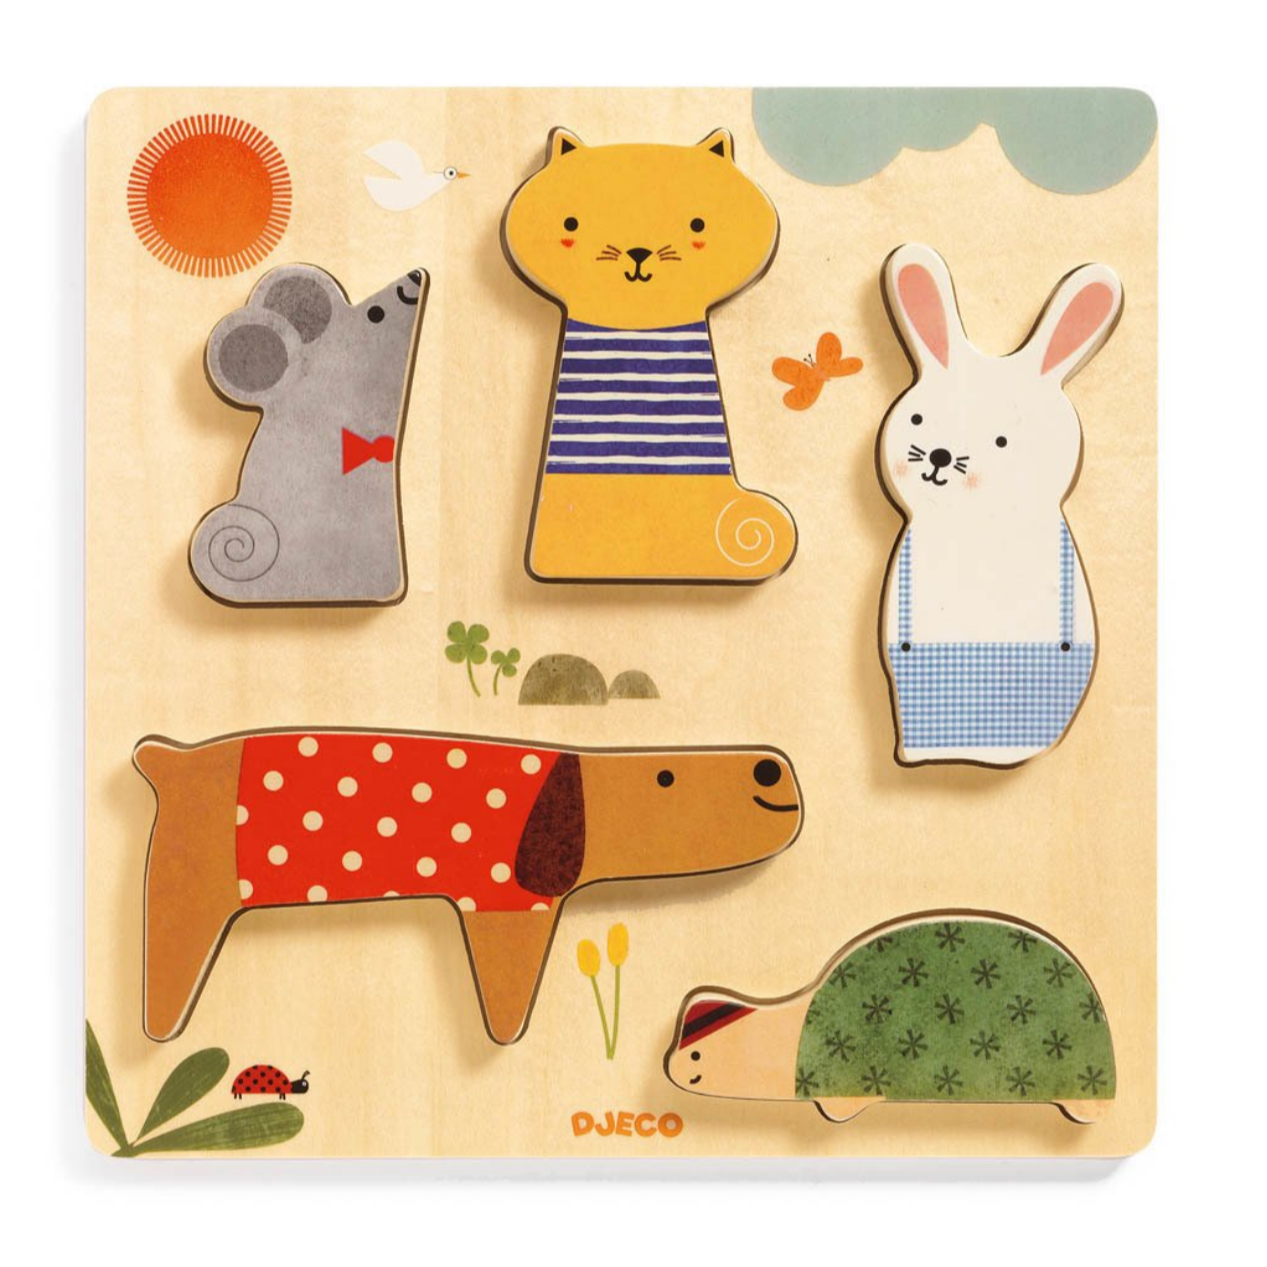 Woodypets Puzzle - 5pcs 1yr+